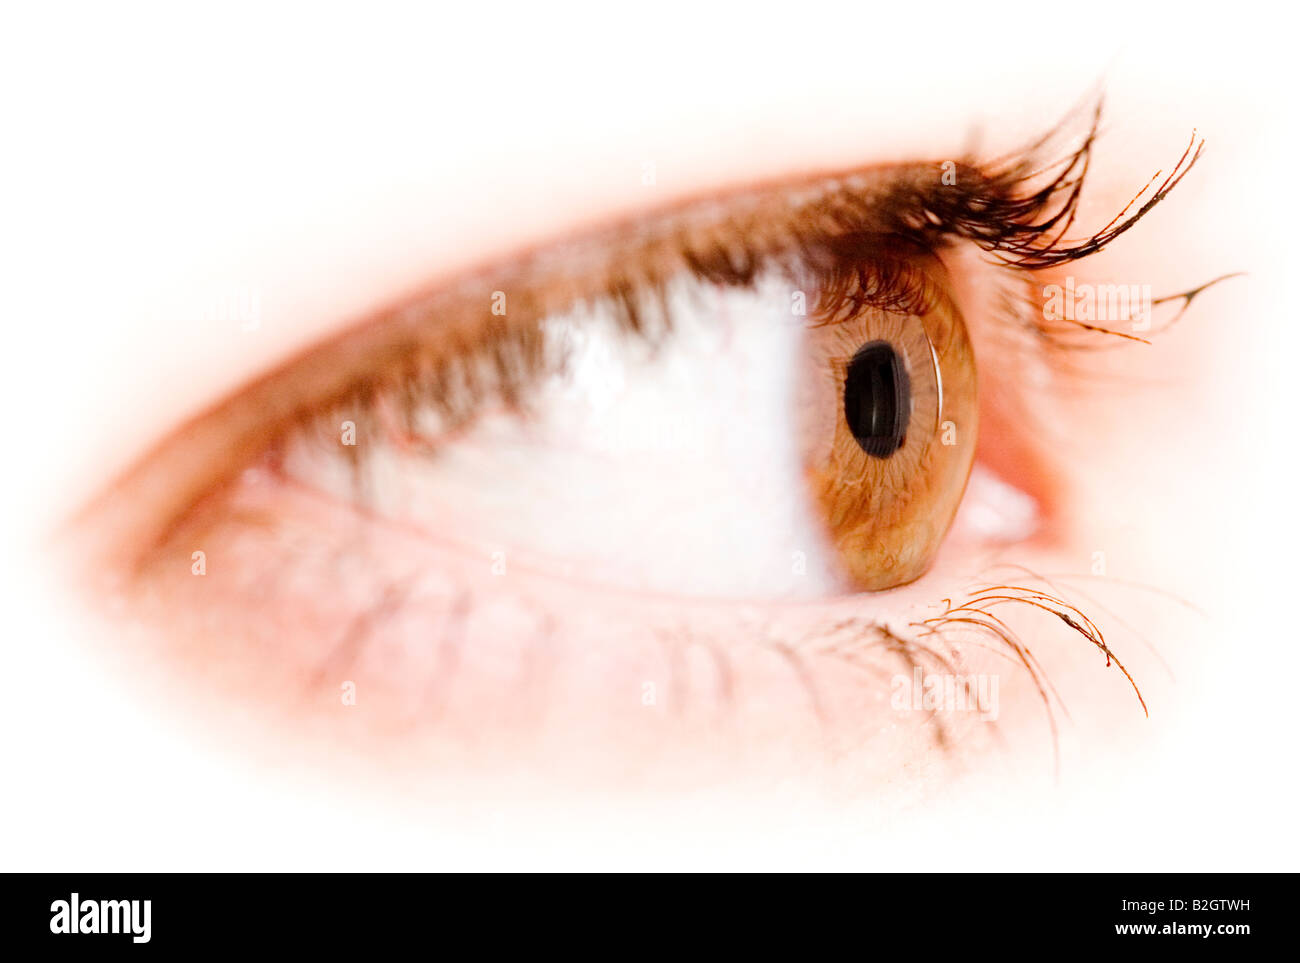 young woman eye eyes glimpse look eyeball detail close up Stock Photo